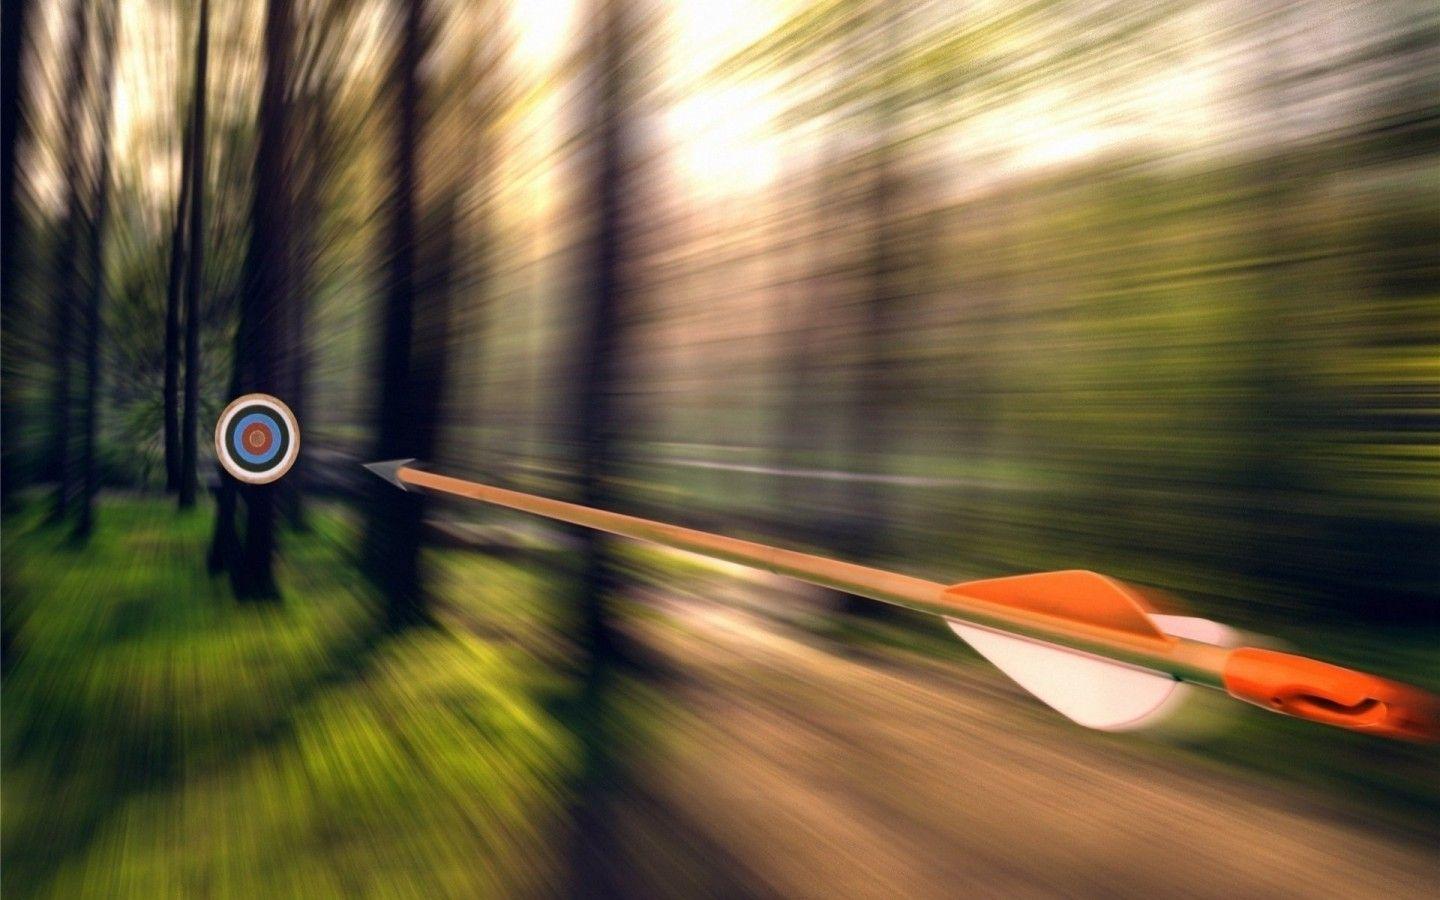 bow and arrow wallpaper. Forest, Arrow, Target wallpaper. archery